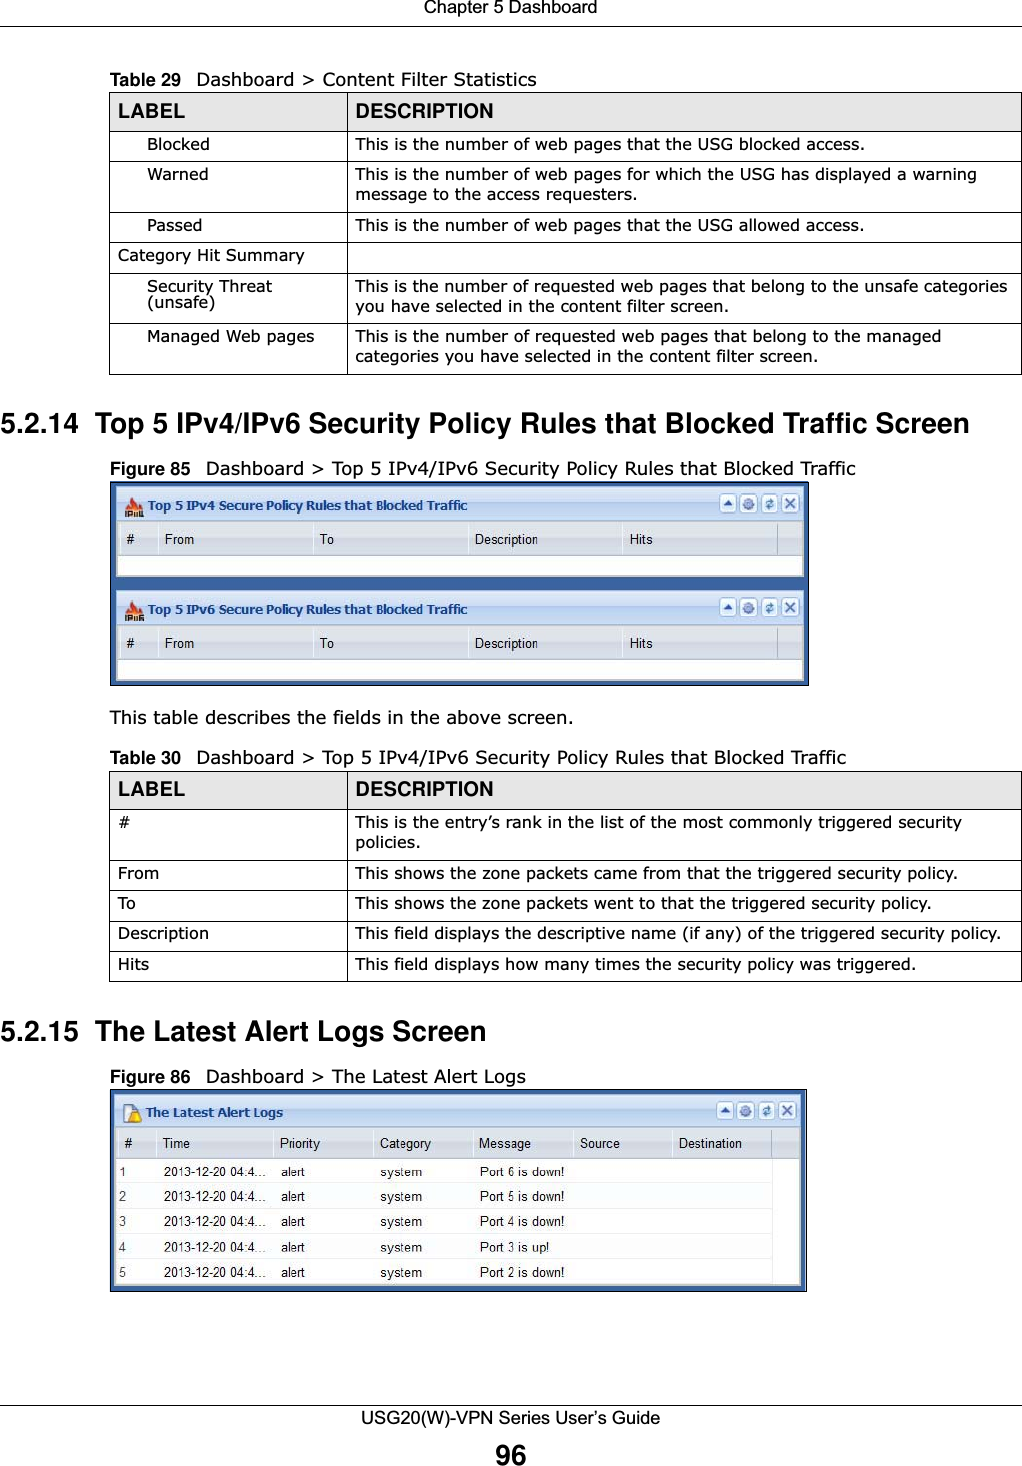 Chapter 5 DashboardUSG20(W)-VPN Series User’s Guide965.2.14  Top 5 IPv4/IPv6 Security Policy Rules that Blocked Traffic ScreenFigure 85   Dashboard &gt; Top 5 IPv4/IPv6 Security Policy Rules that Blocked Traffic This table describes the fields in the above screen. 5.2.15  The Latest Alert Logs ScreenFigure 86   Dashboard &gt; The Latest Alert LogsBlocked This is the number of web pages that the USG blocked access.Warned This is the number of web pages for which the USG has displayed a warning message to the access requesters.Passed This is the number of web pages that the USG allowed access.Category Hit SummarySecurity Threat (unsafe) This is the number of requested web pages that belong to the unsafe categories you have selected in the content filter screen.Managed Web pages This is the number of requested web pages that belong to the managed categories you have selected in the content filter screen.Table 29   Dashboard &gt; Content Filter StatisticsLABEL DESCRIPTIONTable 30   Dashboard &gt; Top 5 IPv4/IPv6 Security Policy Rules that Blocked TrafficLABEL DESCRIPTION# This is the entry’s rank in the list of the most commonly triggered security policies.From This shows the zone packets came from that the triggered security policy.To This shows the zone packets went to that the triggered security policy.Description This field displays the descriptive name (if any) of the triggered security policy.Hits This field displays how many times the security policy was triggered.